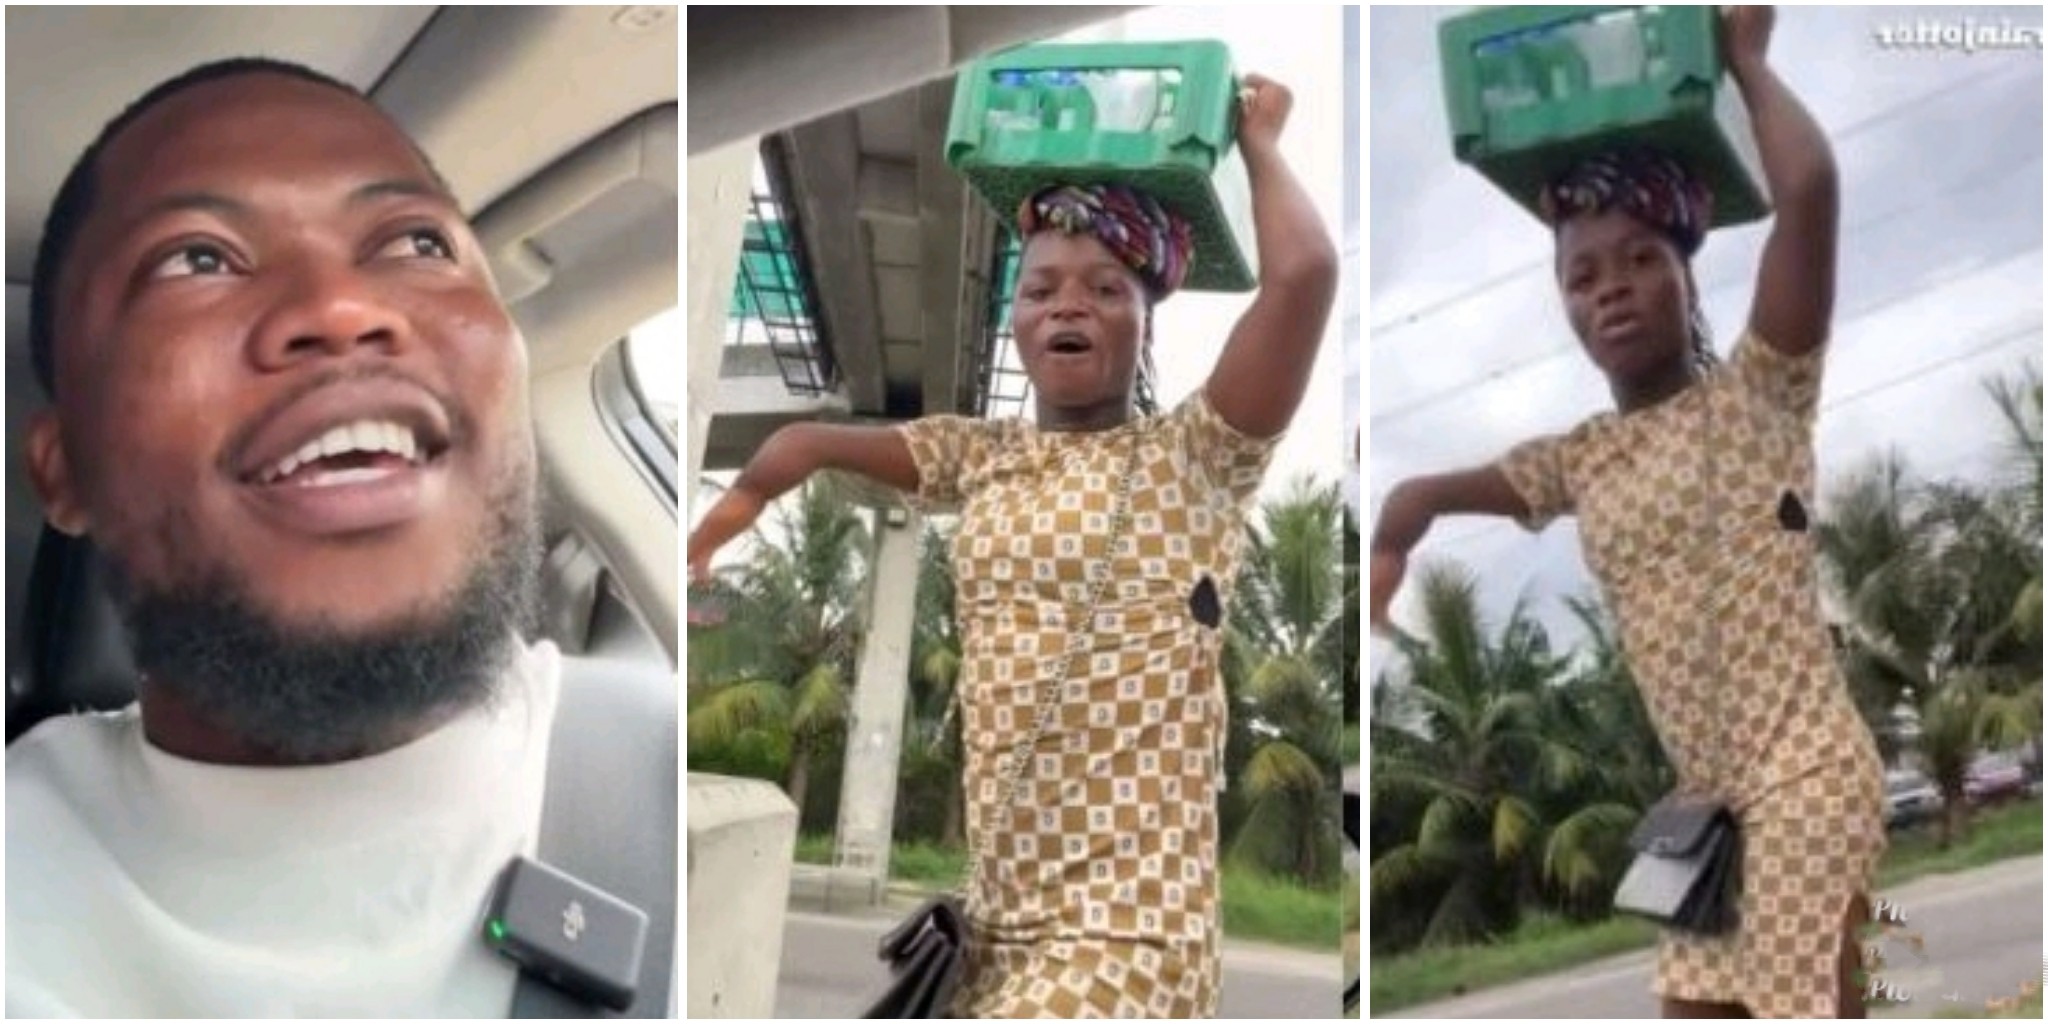 Brain Jotter puts smile on face of physically challenged lady hawking water on streets with 400k gift